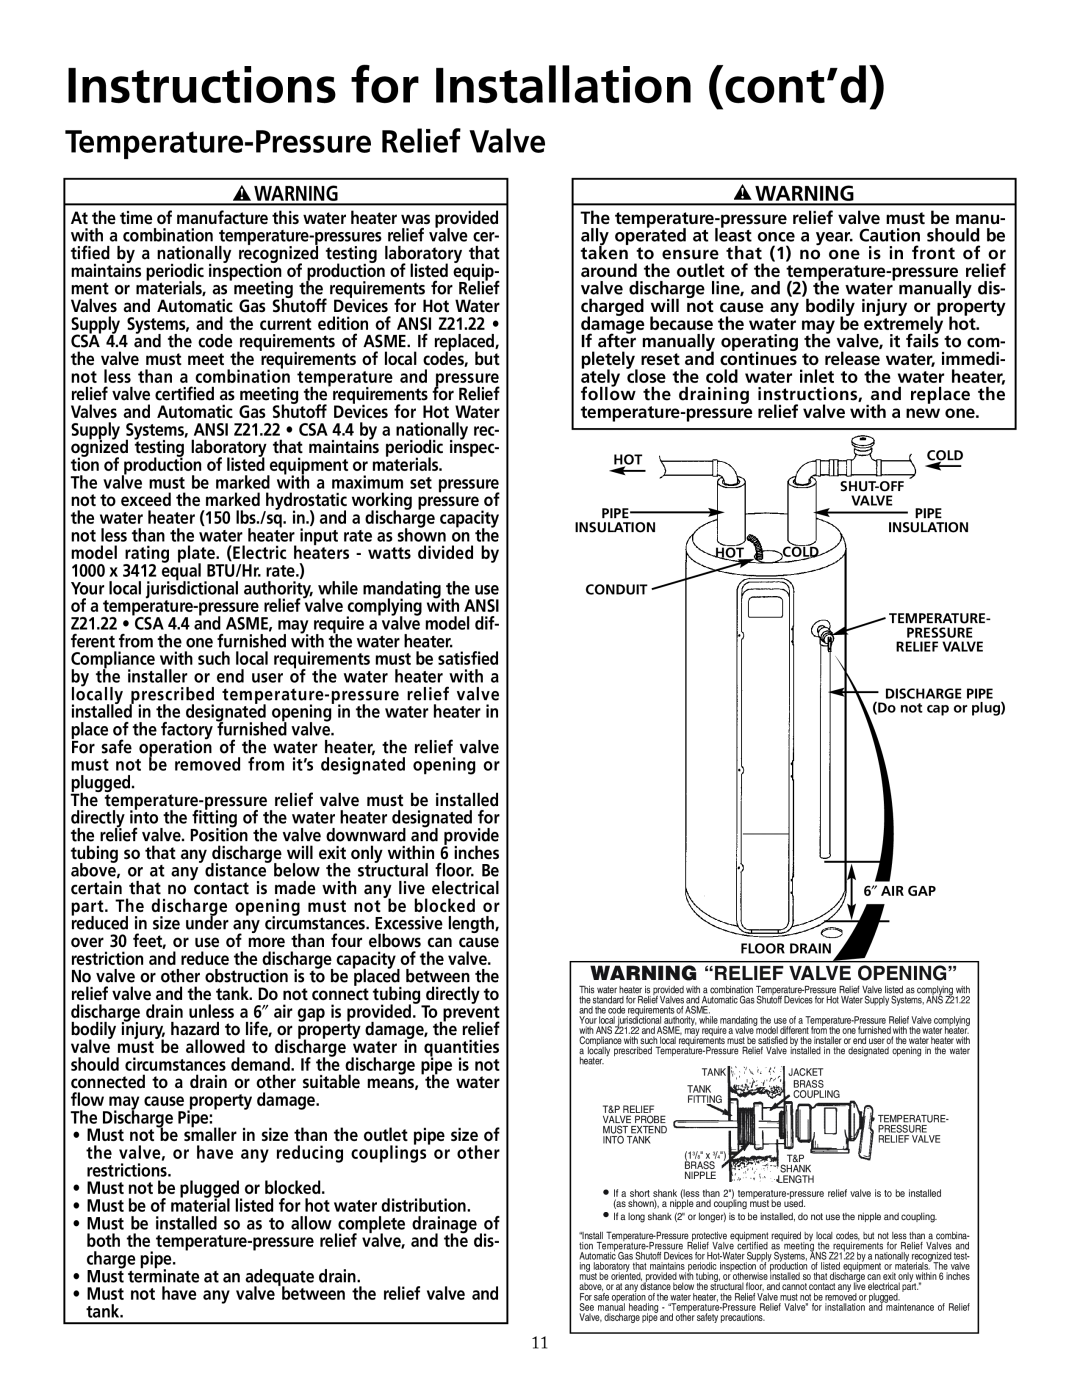 Maytag HRE21282PC Temperature-PressureRelief Valve, Warning “Relief Valve Opening”, Instructions for Installation cont’d 